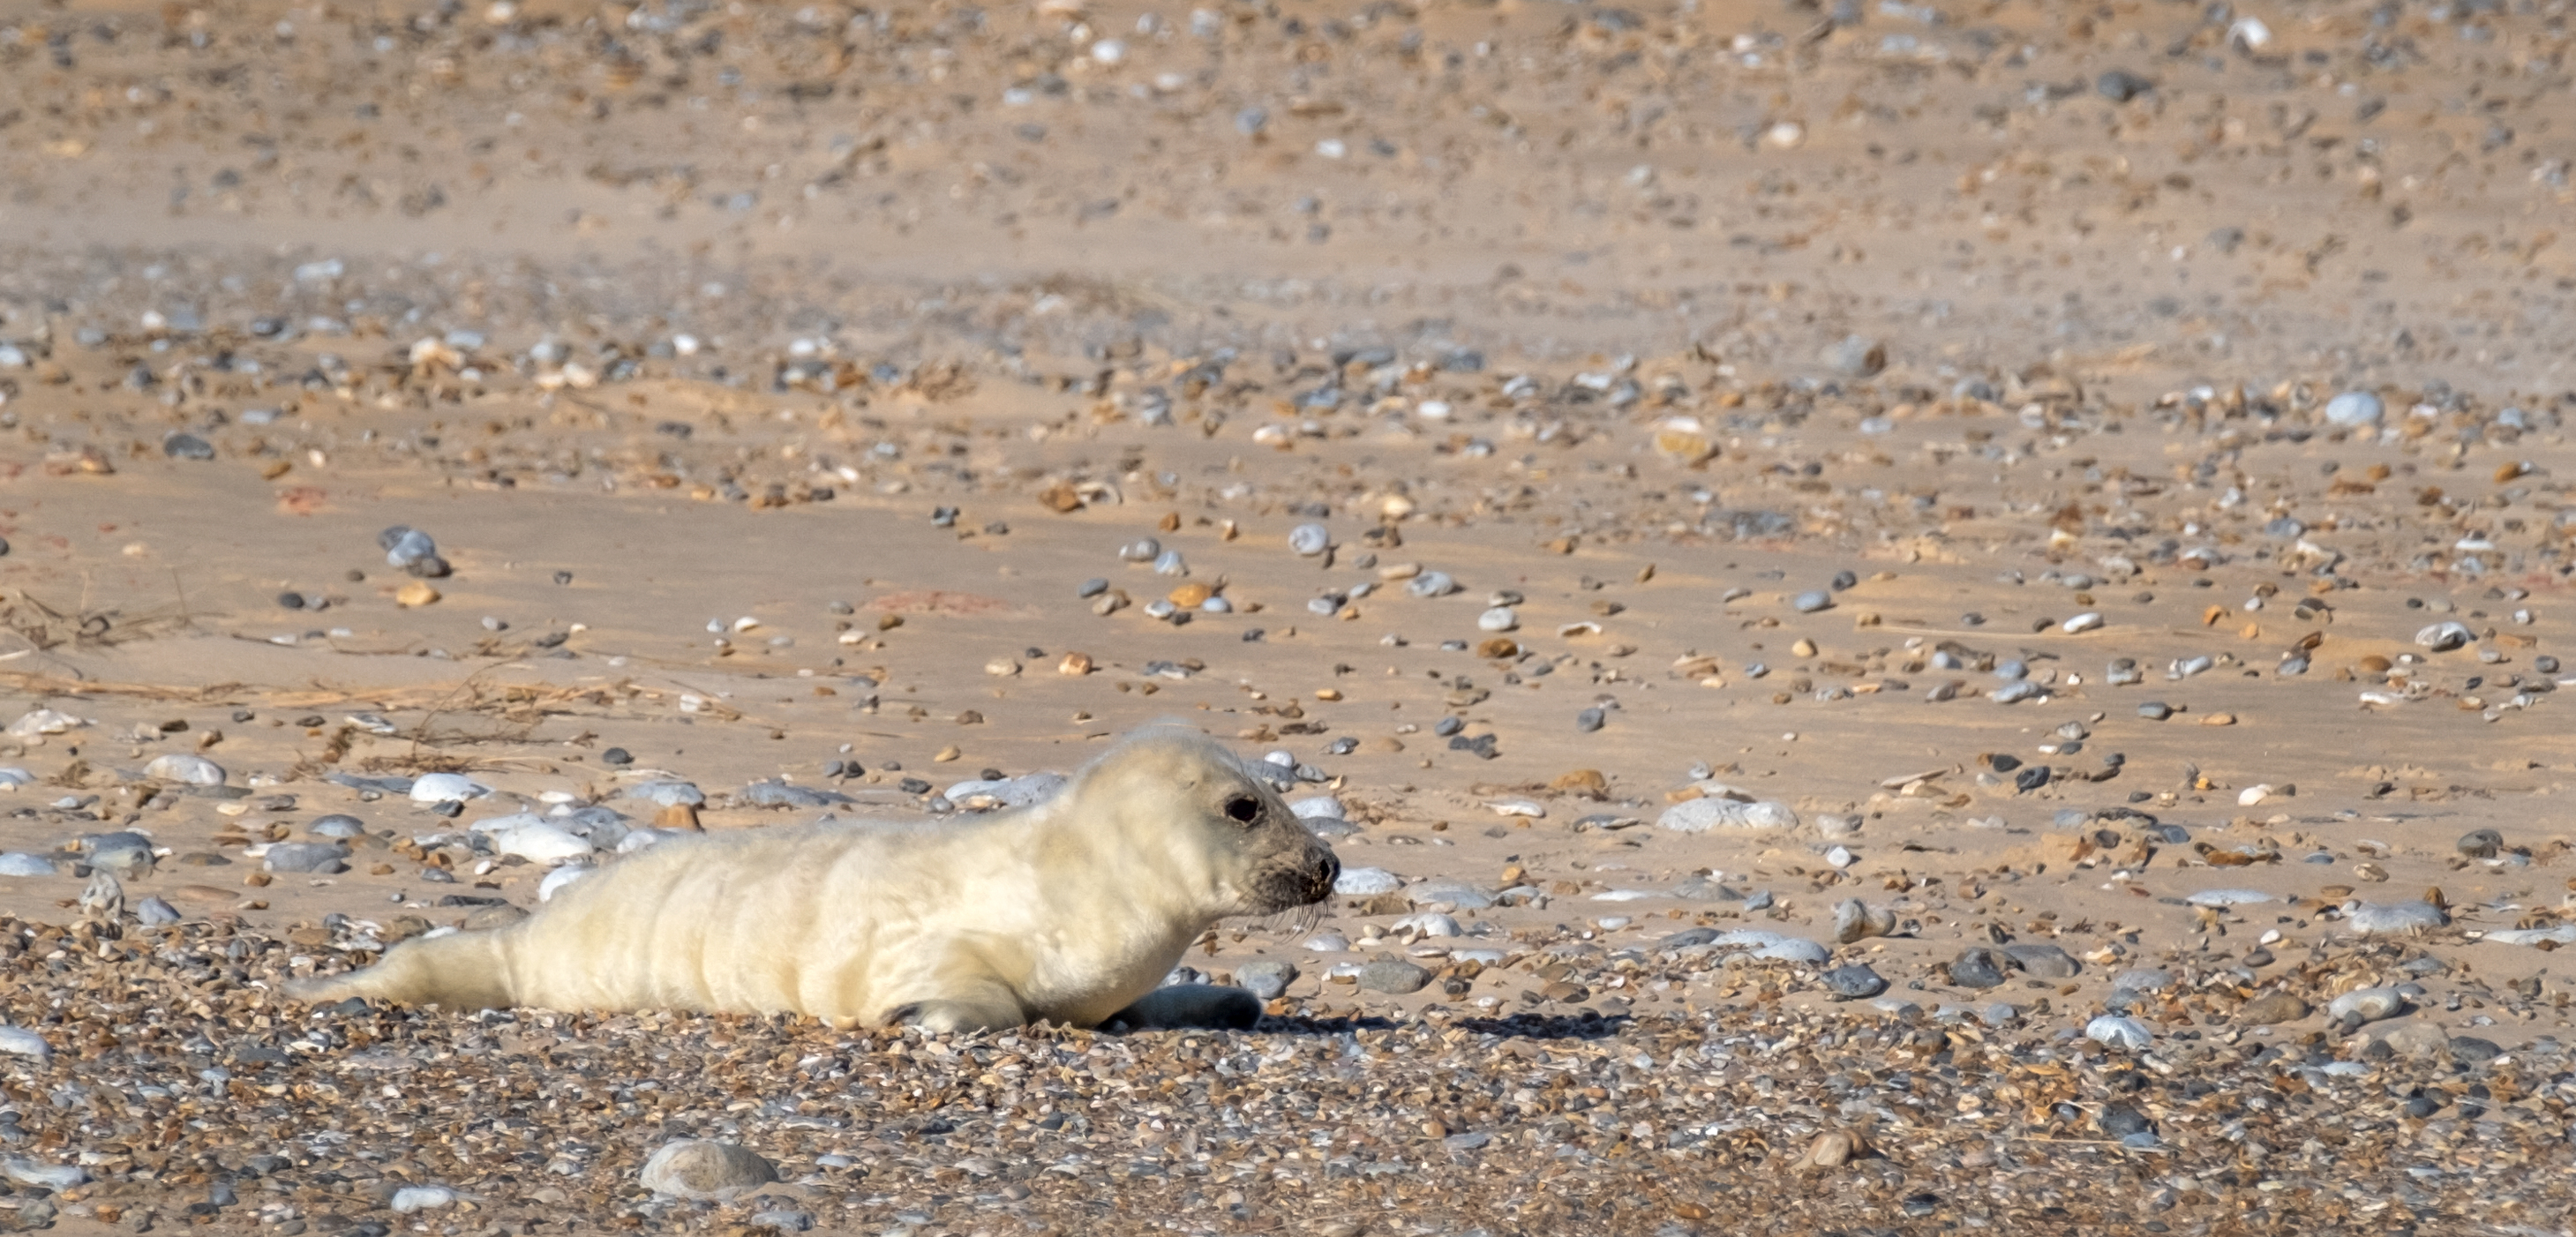 Rangers are expecting around 4,500 grey seal pups to be born at Blakeney Point this season (Hanne Siebers/ National Trust/ PA)